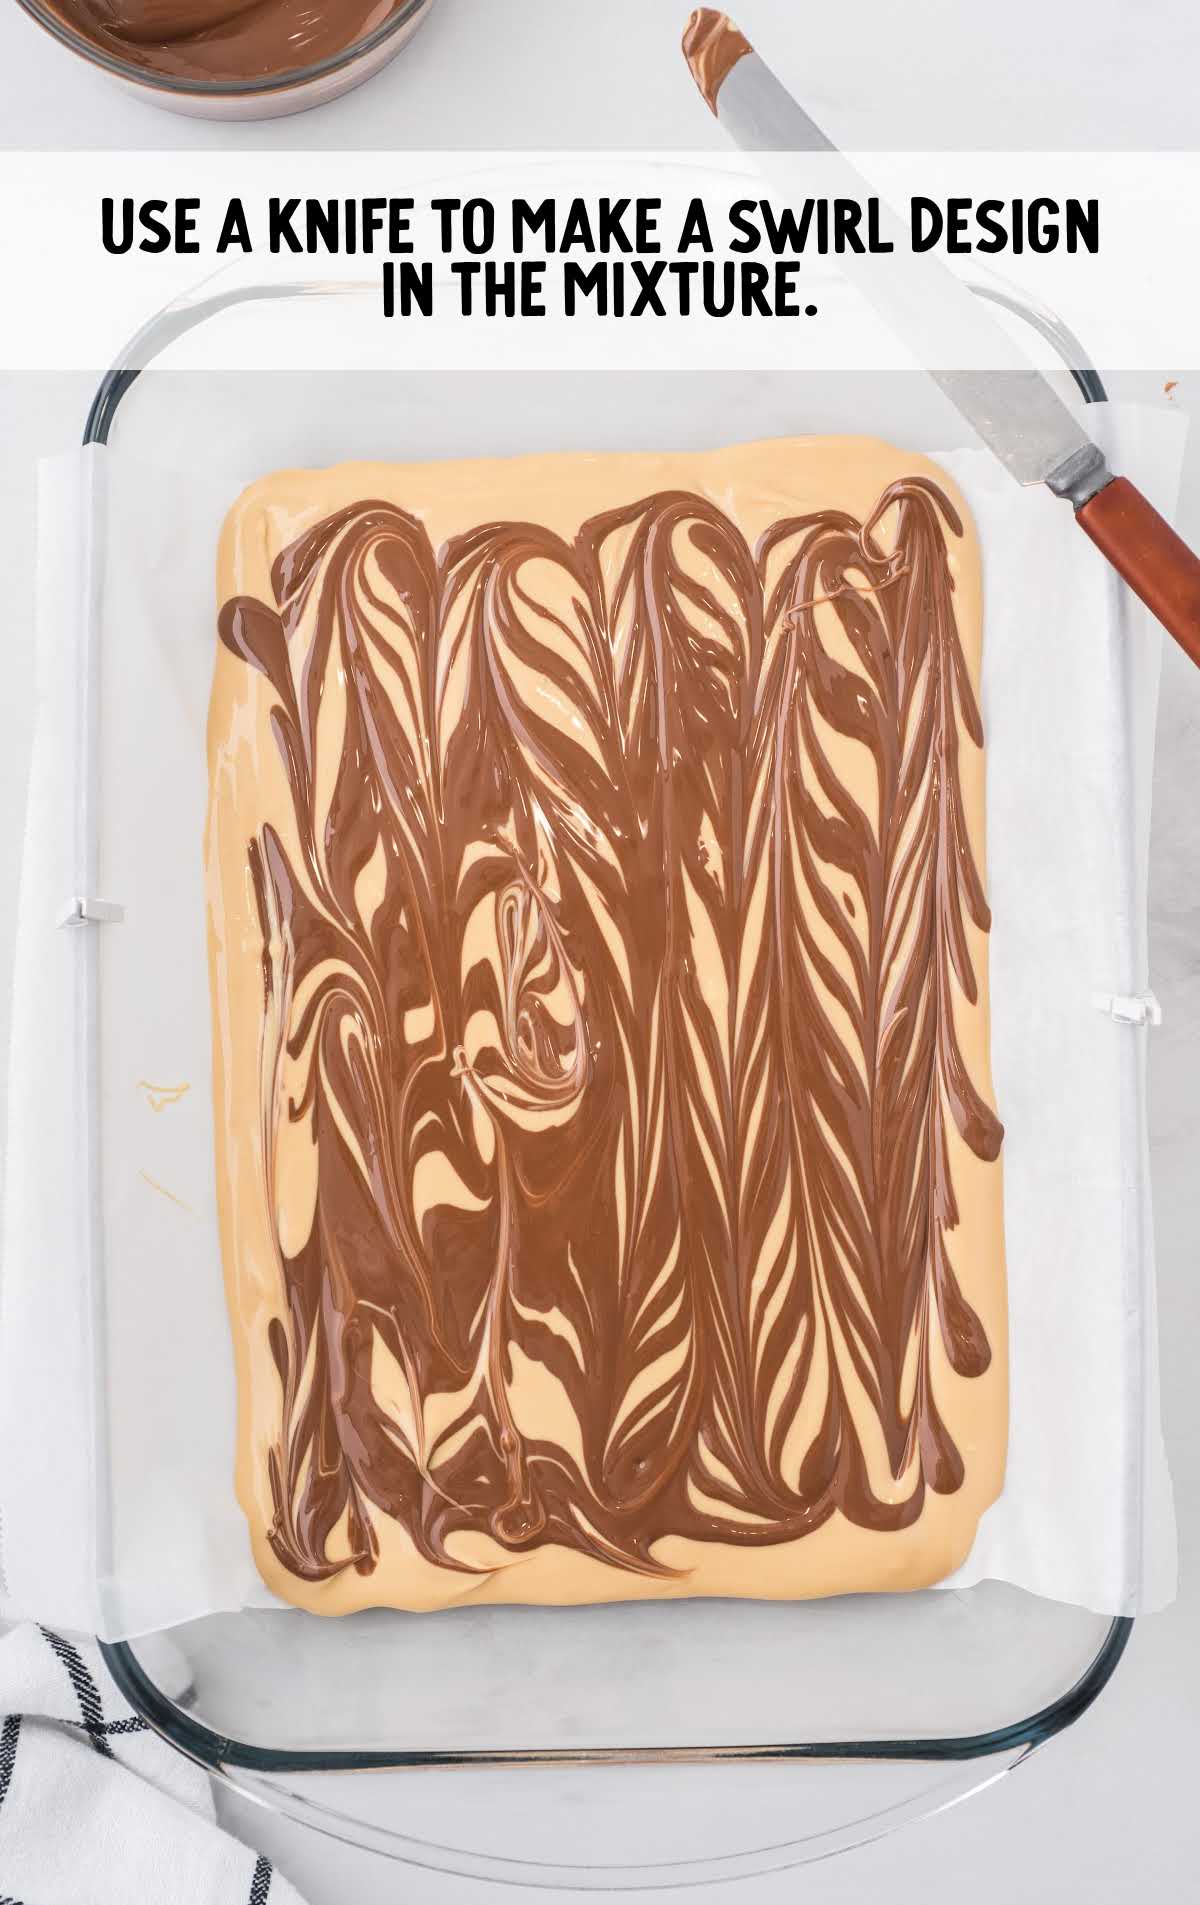 tiger fudge process shot of swirl designs being made on fudge with a knife